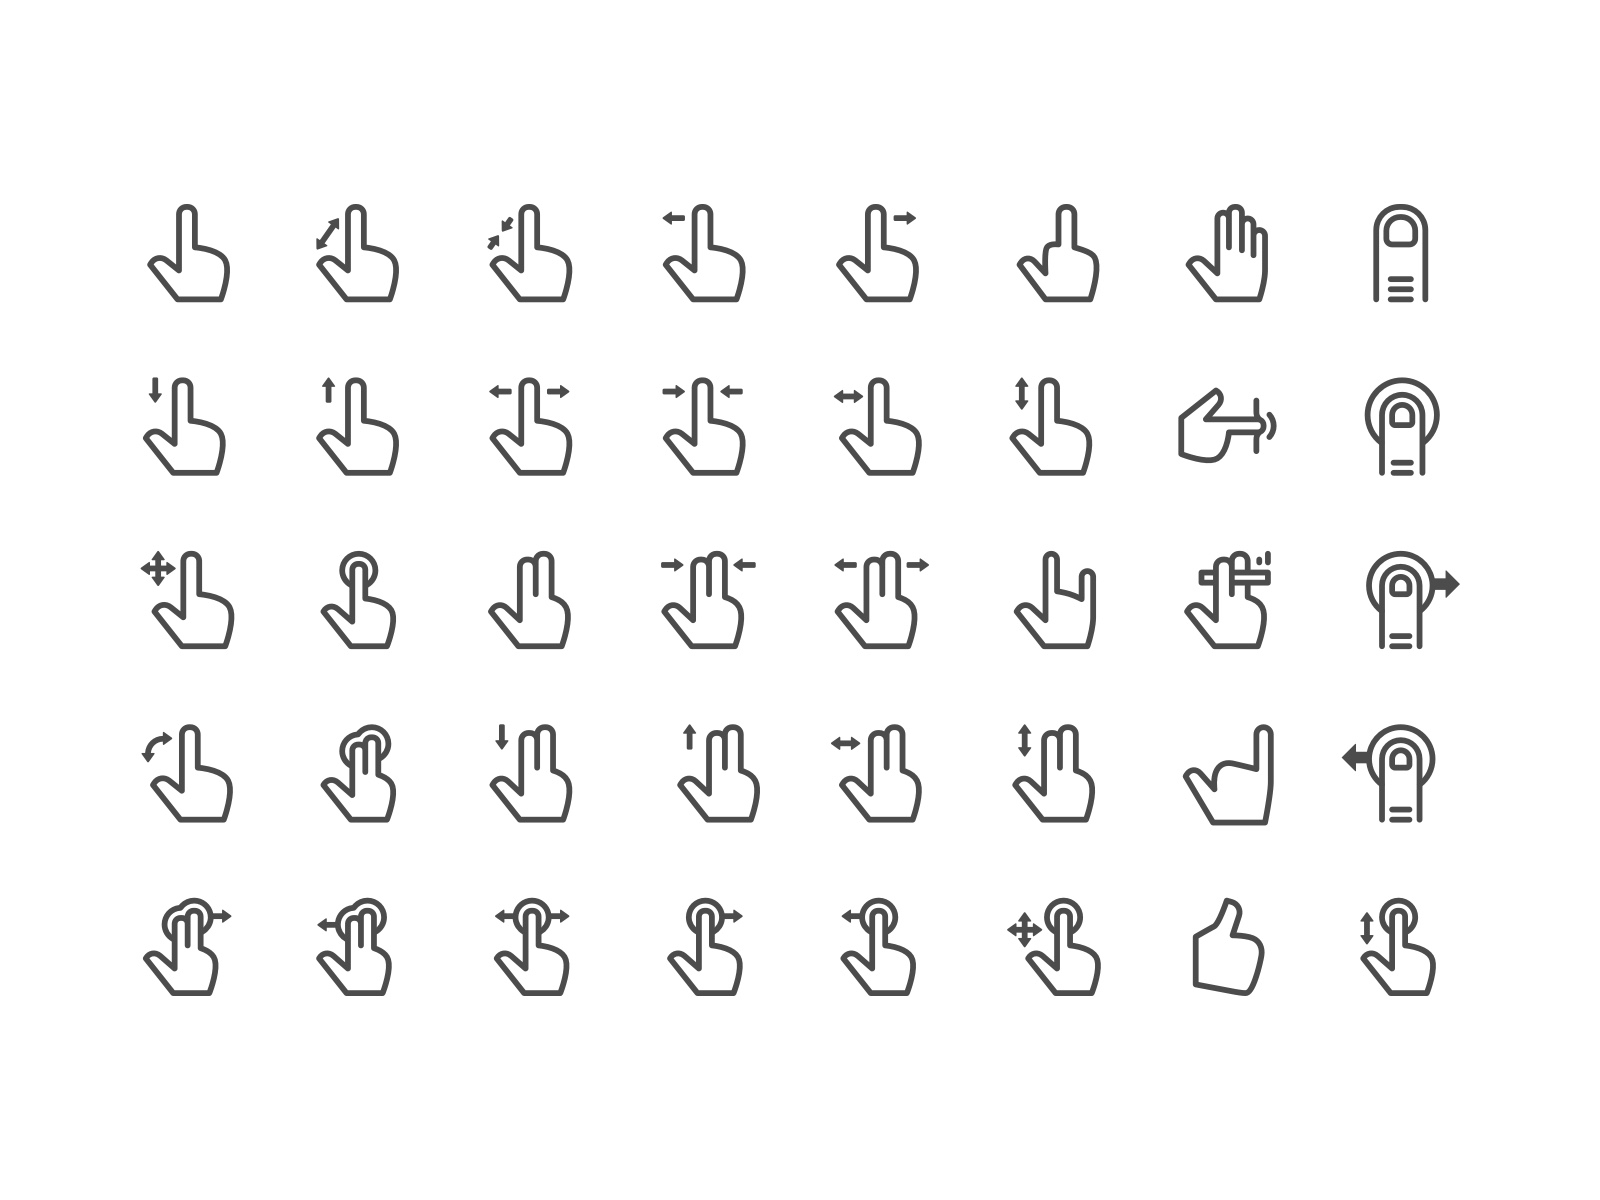 The full Hand Gestures Icon Set